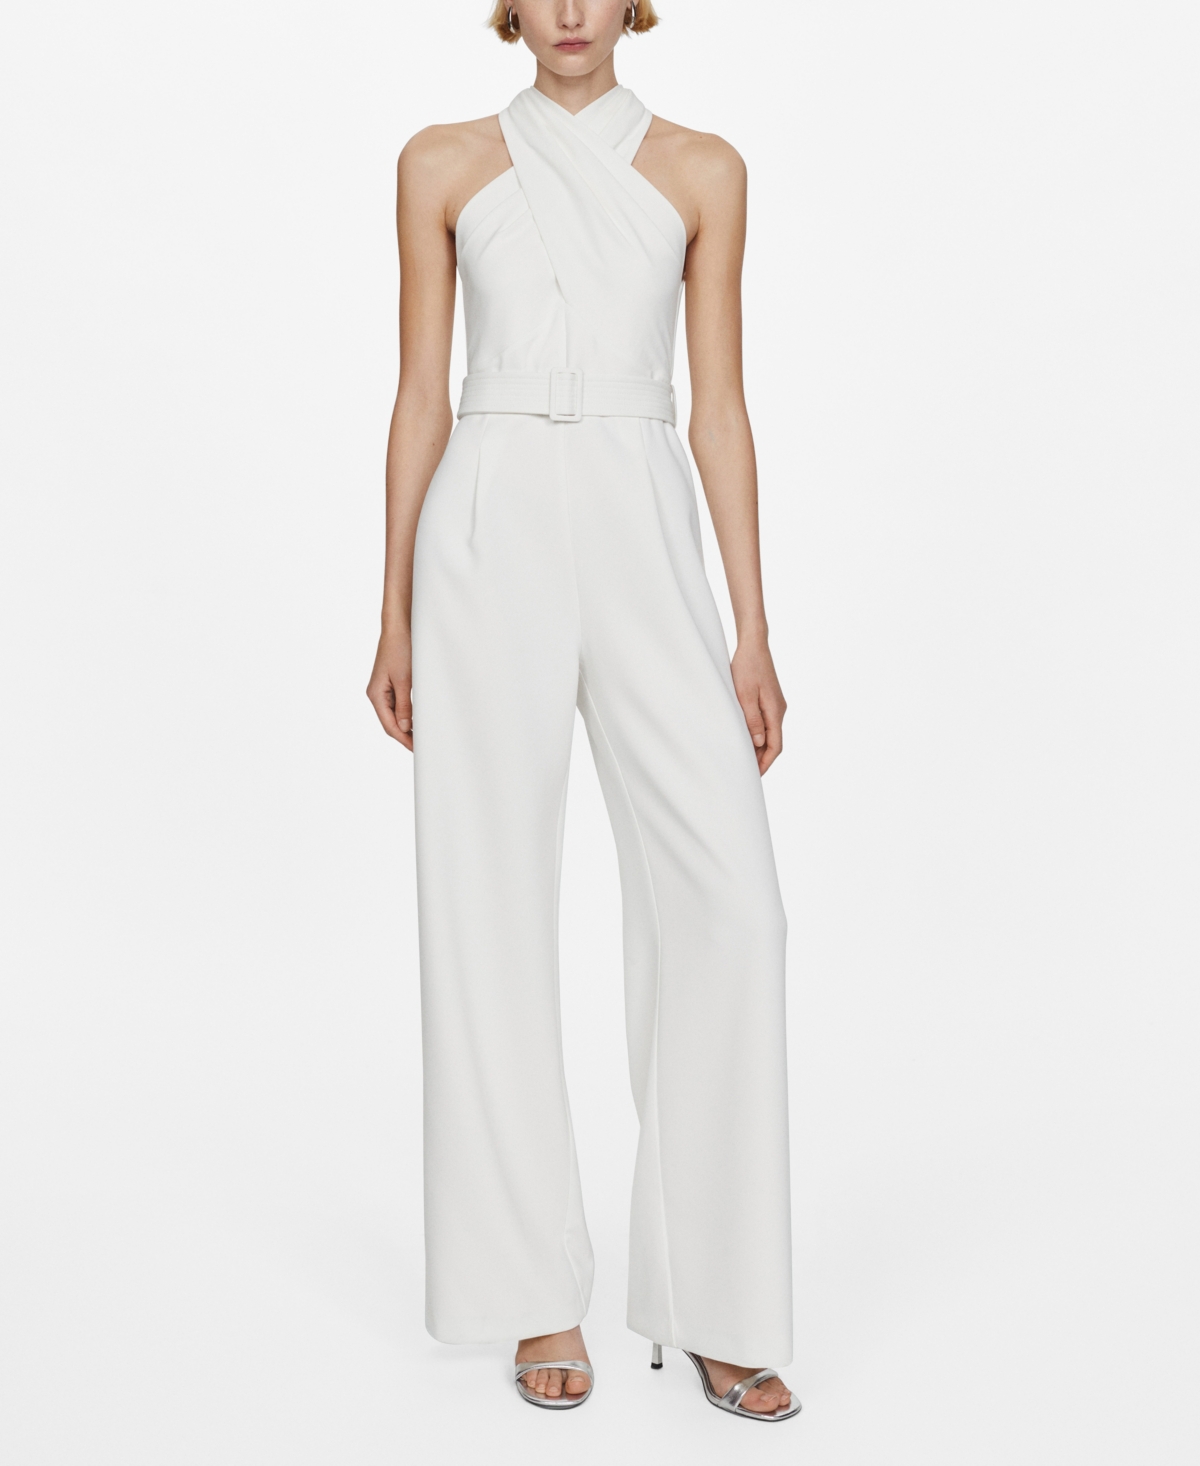 Mango Women's Belted Crossover Collar Jumpsuit In Natural White